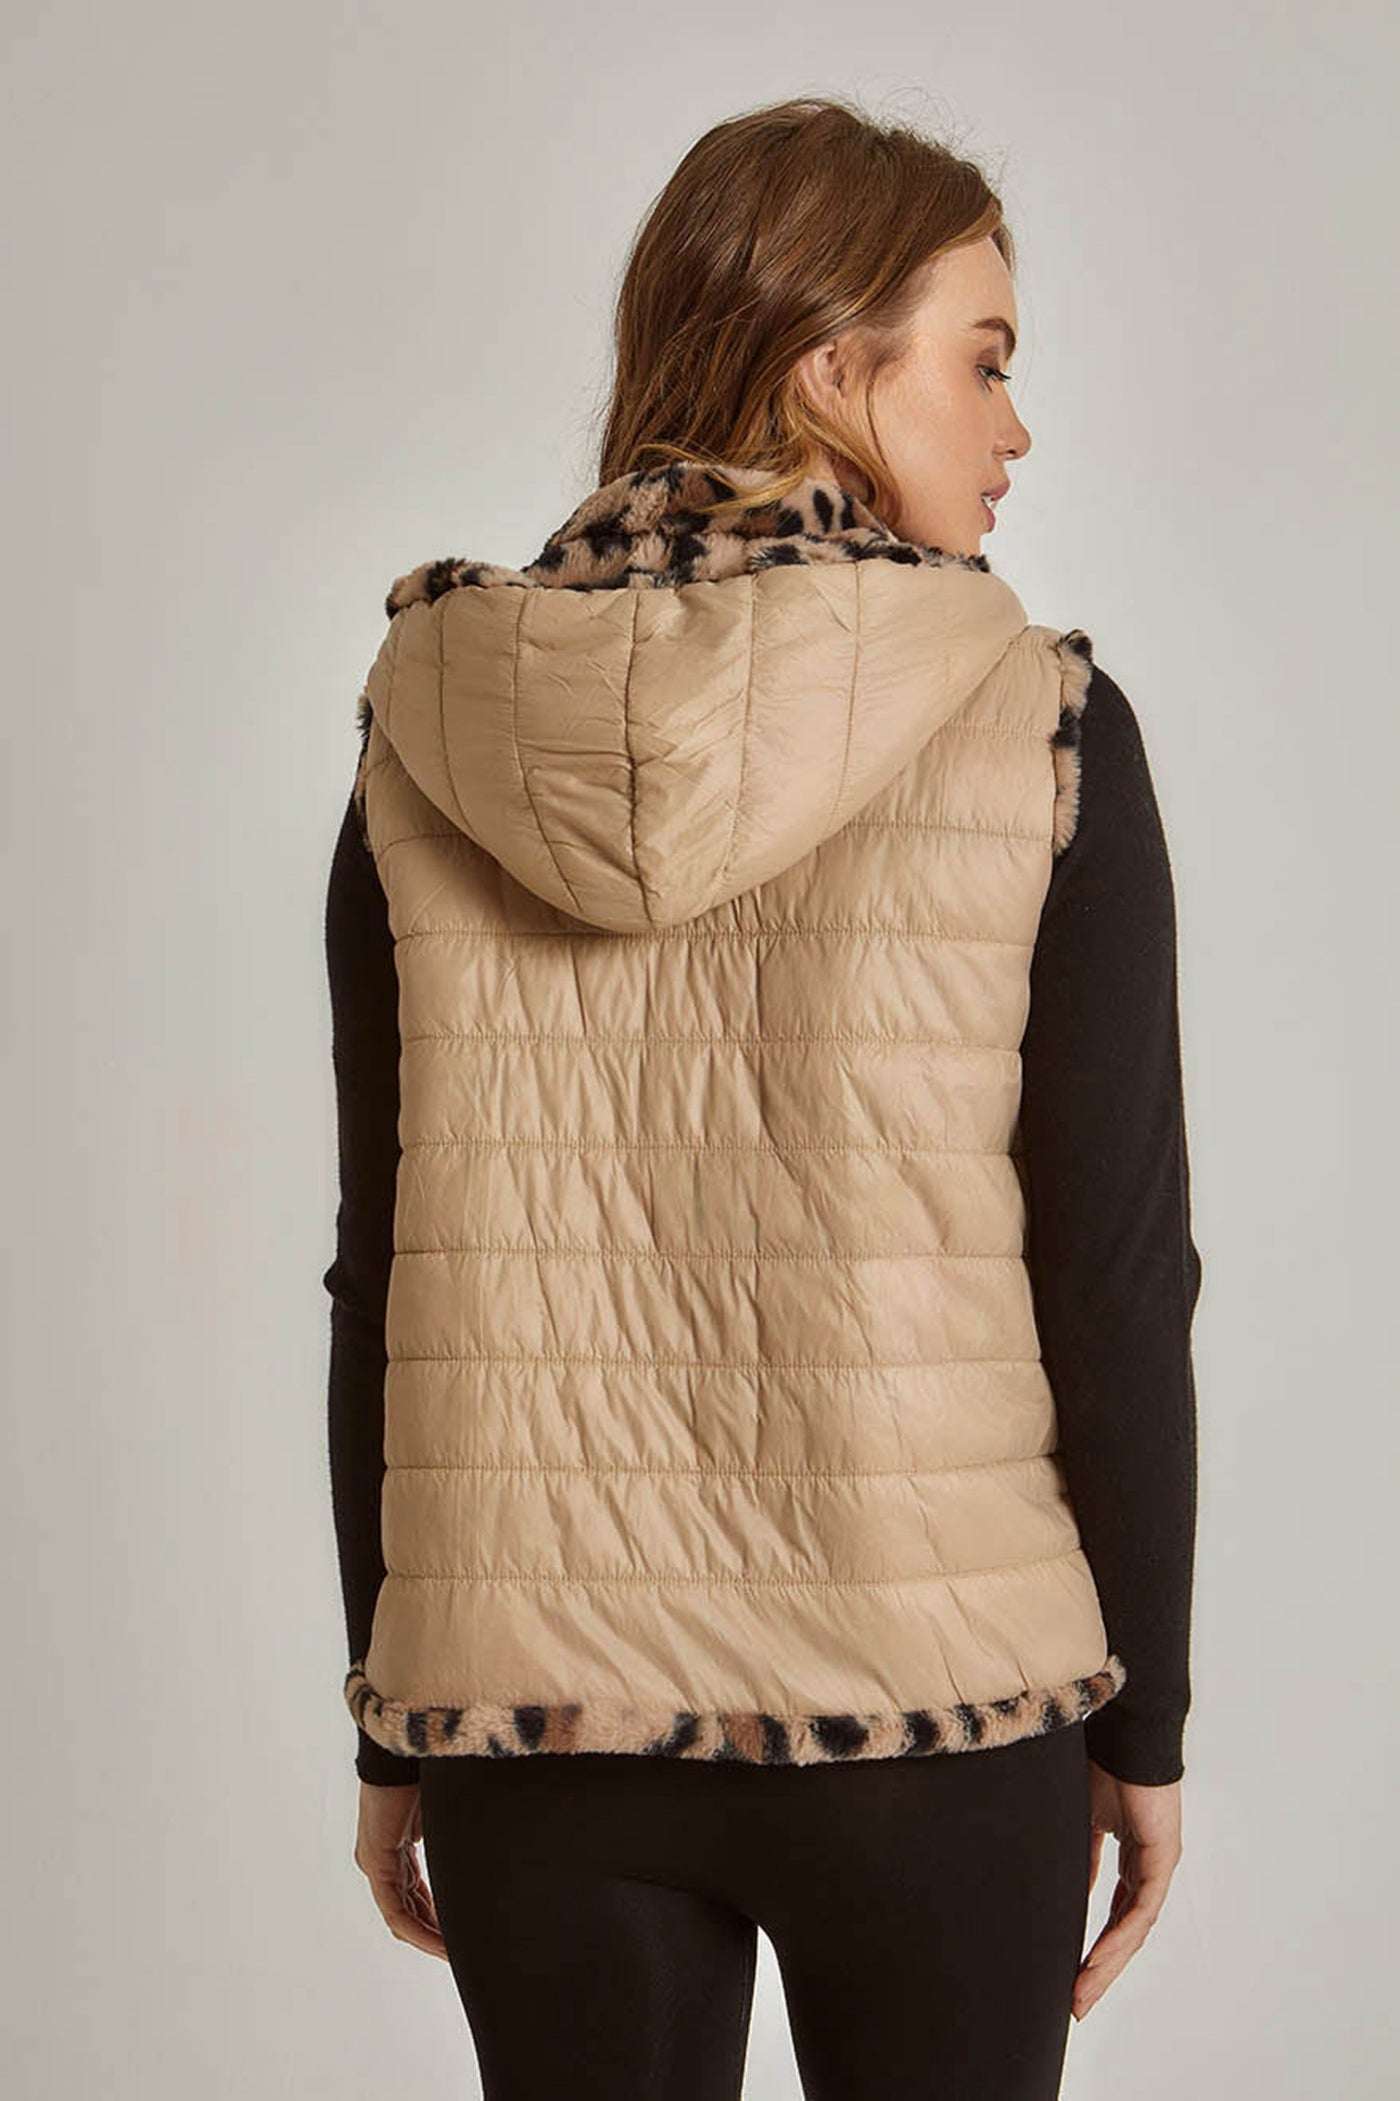 Vest - Animal Pattern - Hooded - Double Face